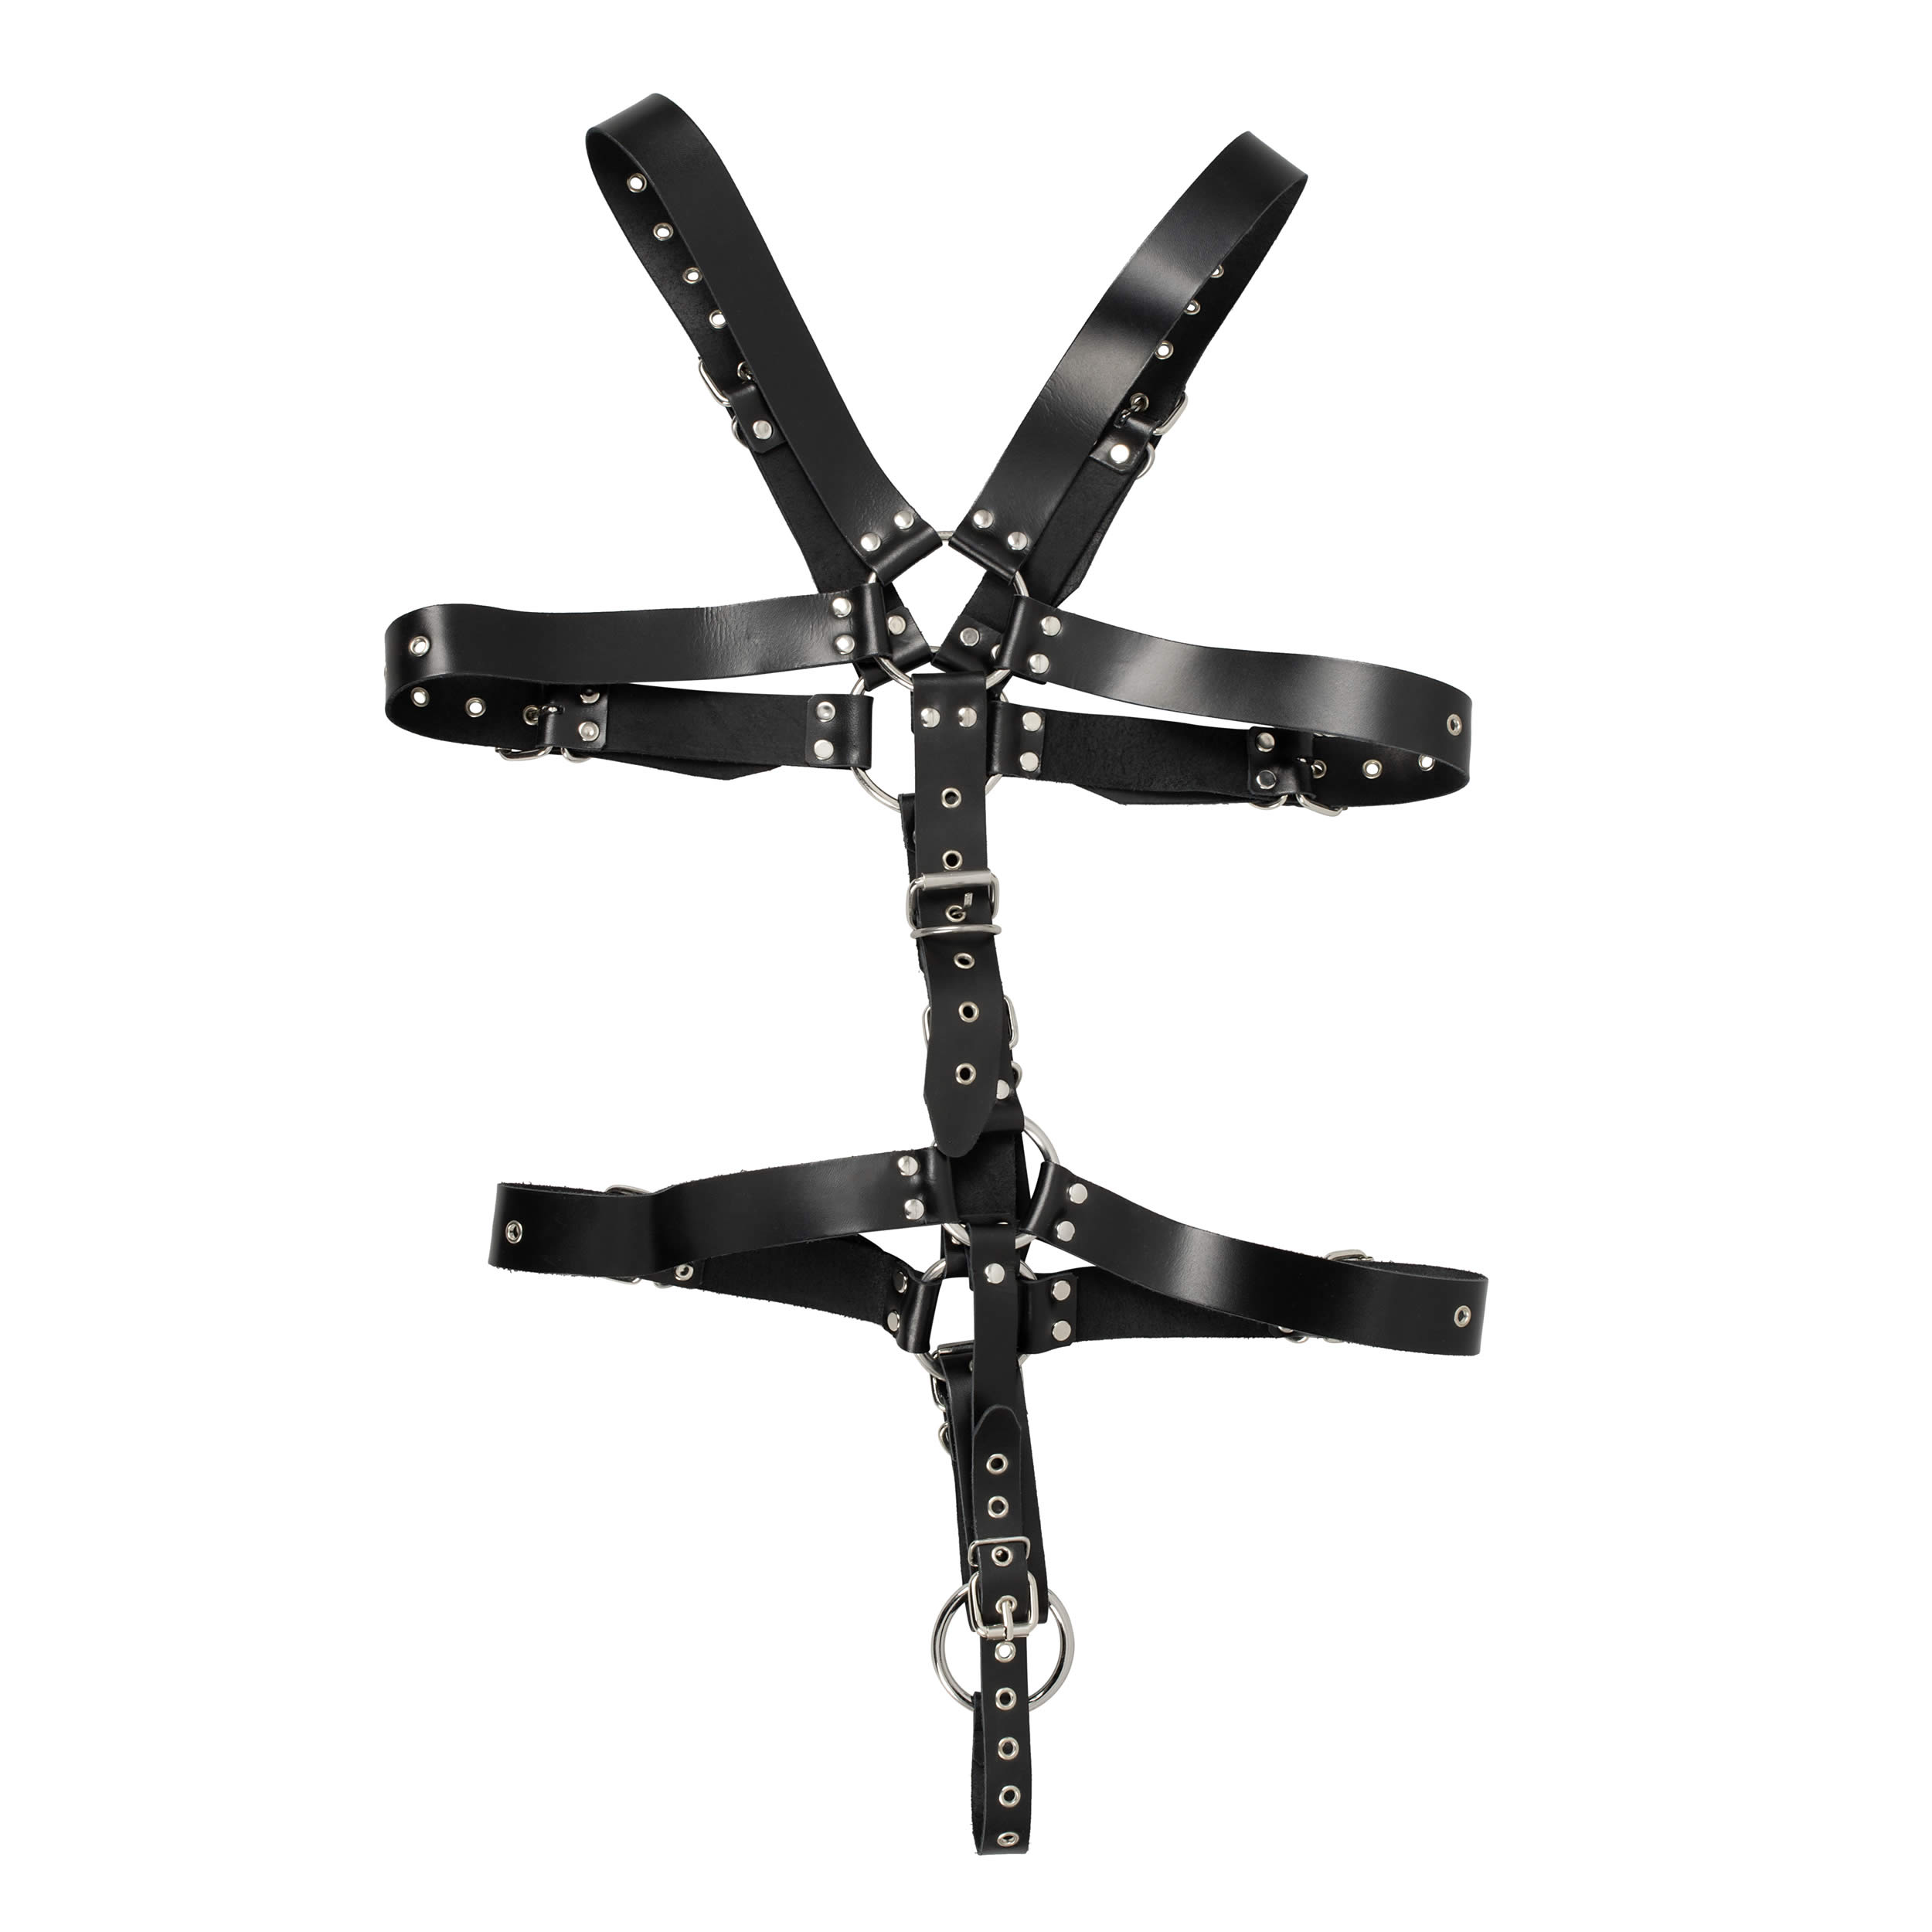 Zado Body Harness from Leather for Him